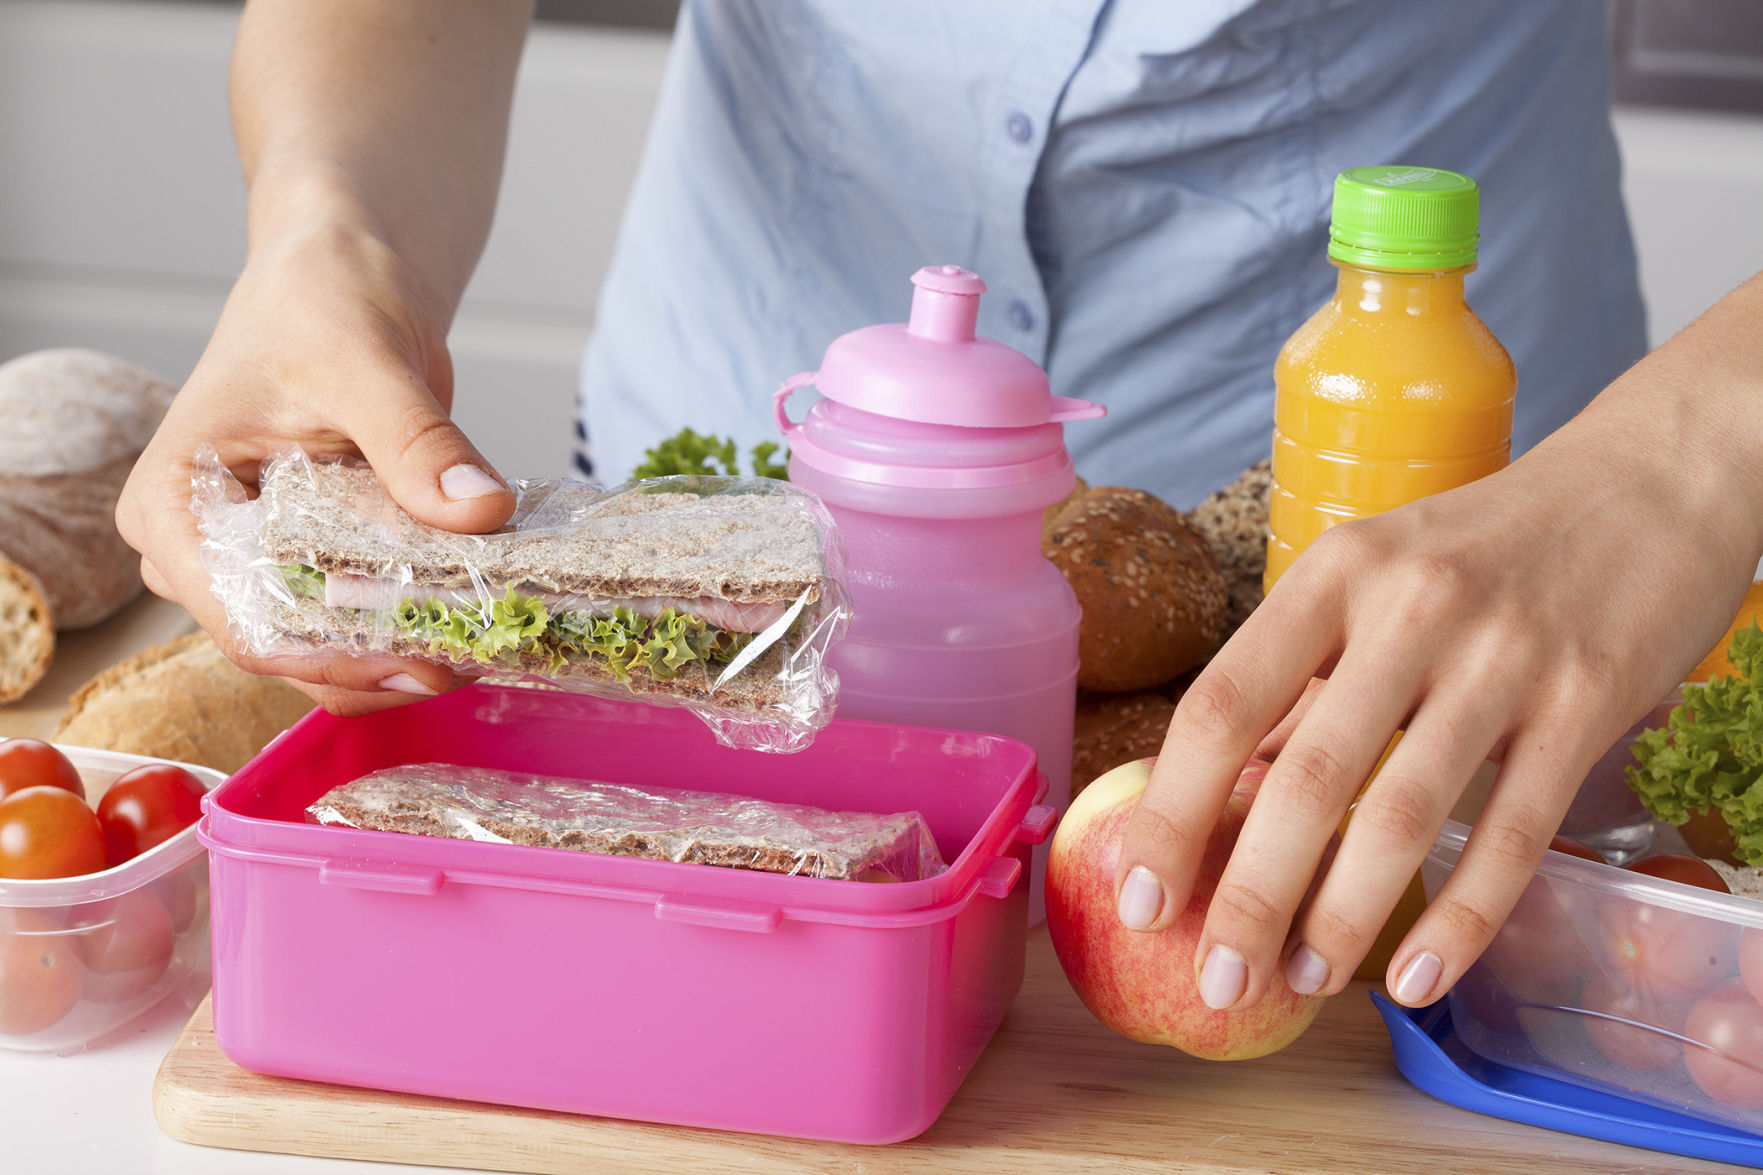 With the beginning of a new school year, parents and caregivers may be concerned about whether children are eating the food in their lunch boxes. The more important concern, though, is whether the food is safe to eat. (Photo courtesy of FAPC.)